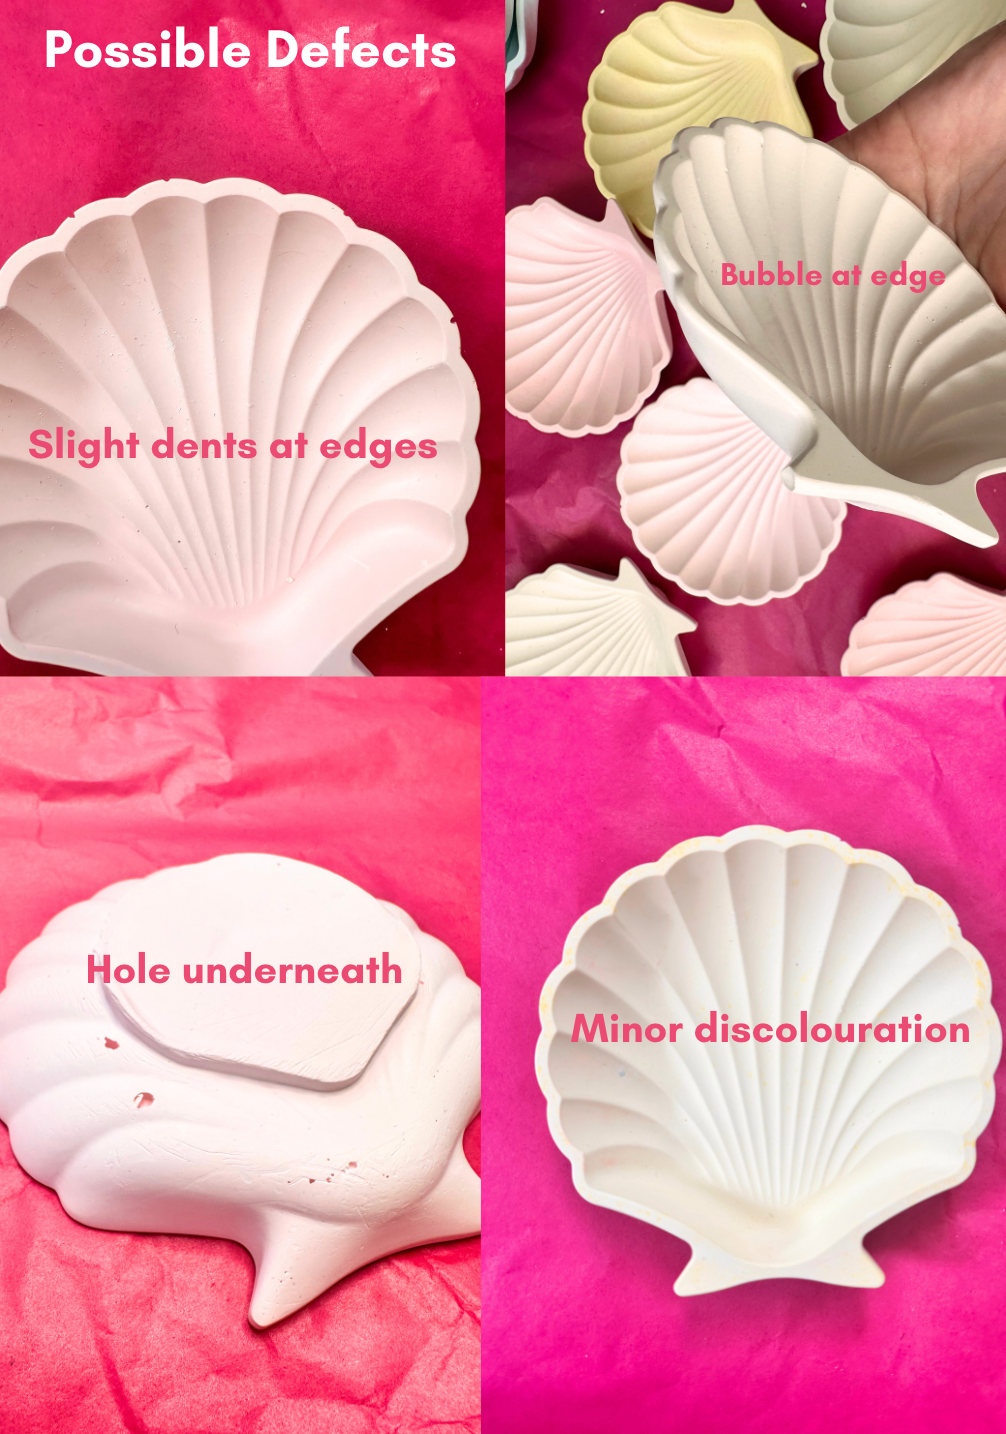 SUPER SECONDS - Marina Pastel Stone Shell Trinket Dish - WAS £8 NOW £5